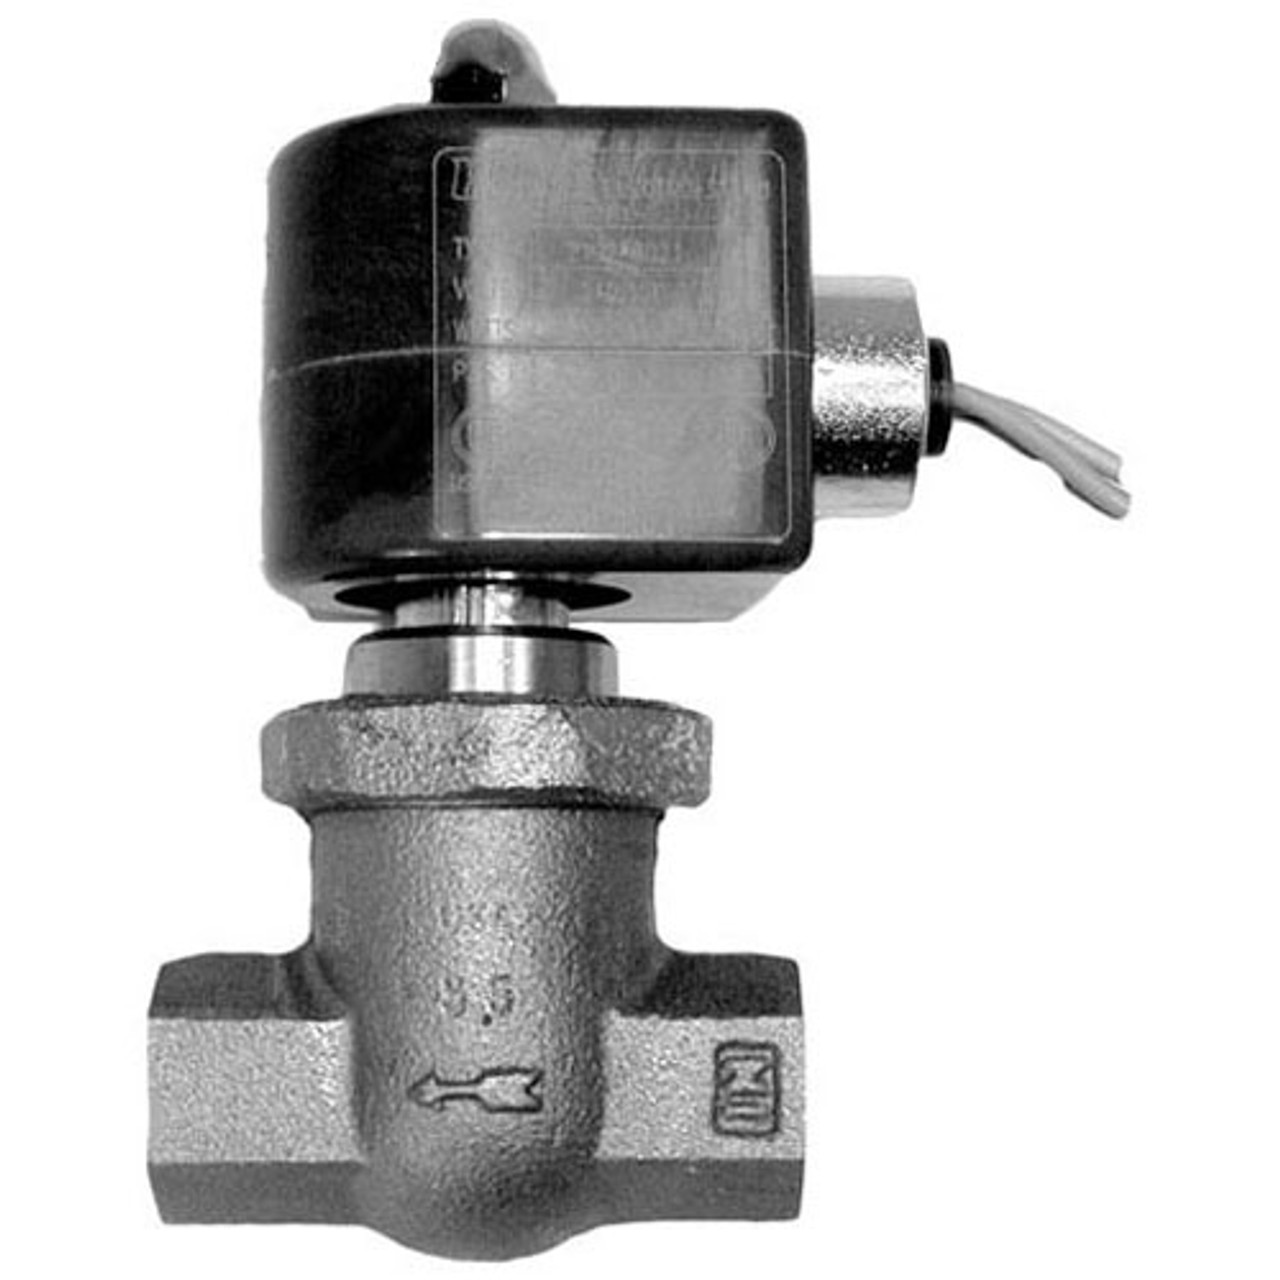 Solenoid Valve 1/2" 240V - Replacement Part For AllPoints 581057